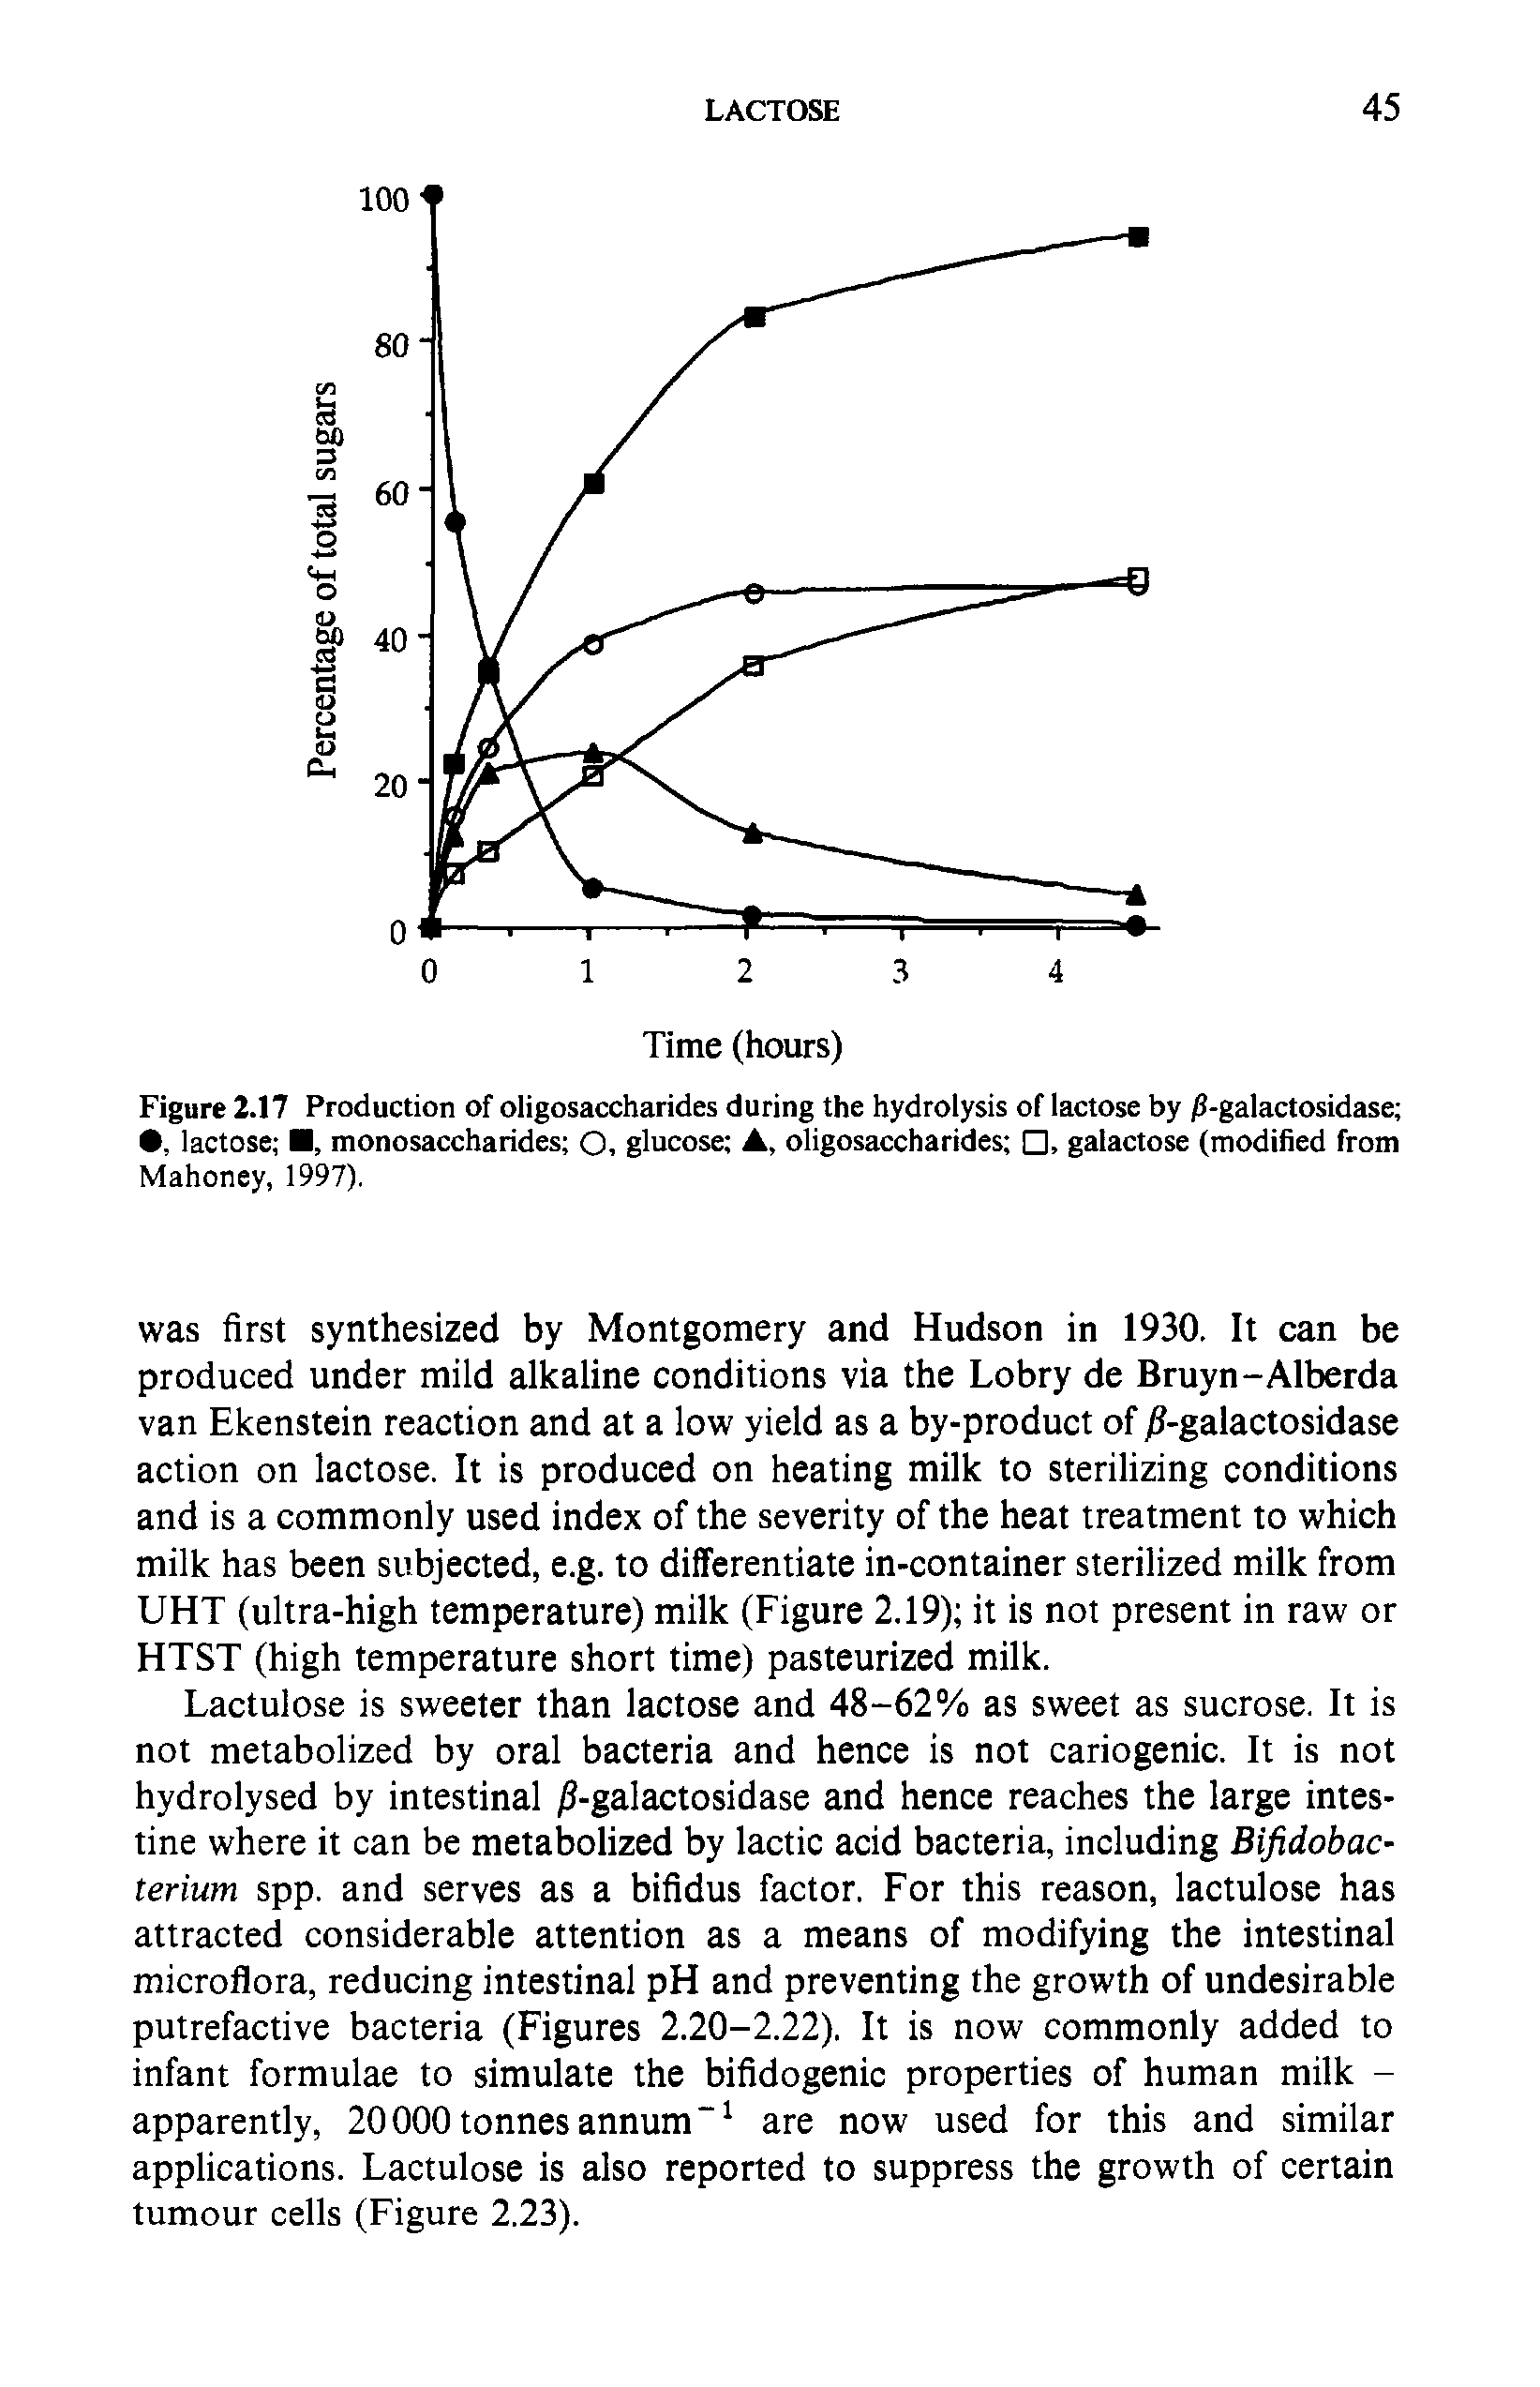 Figure 2.17 Production of oligosaccharides during the hydrolysis of lactose by /5-galactosidase . lactose , monosaccharides O, glucose , oligosaccharides , galactose (modified from Mahoney, 1997).